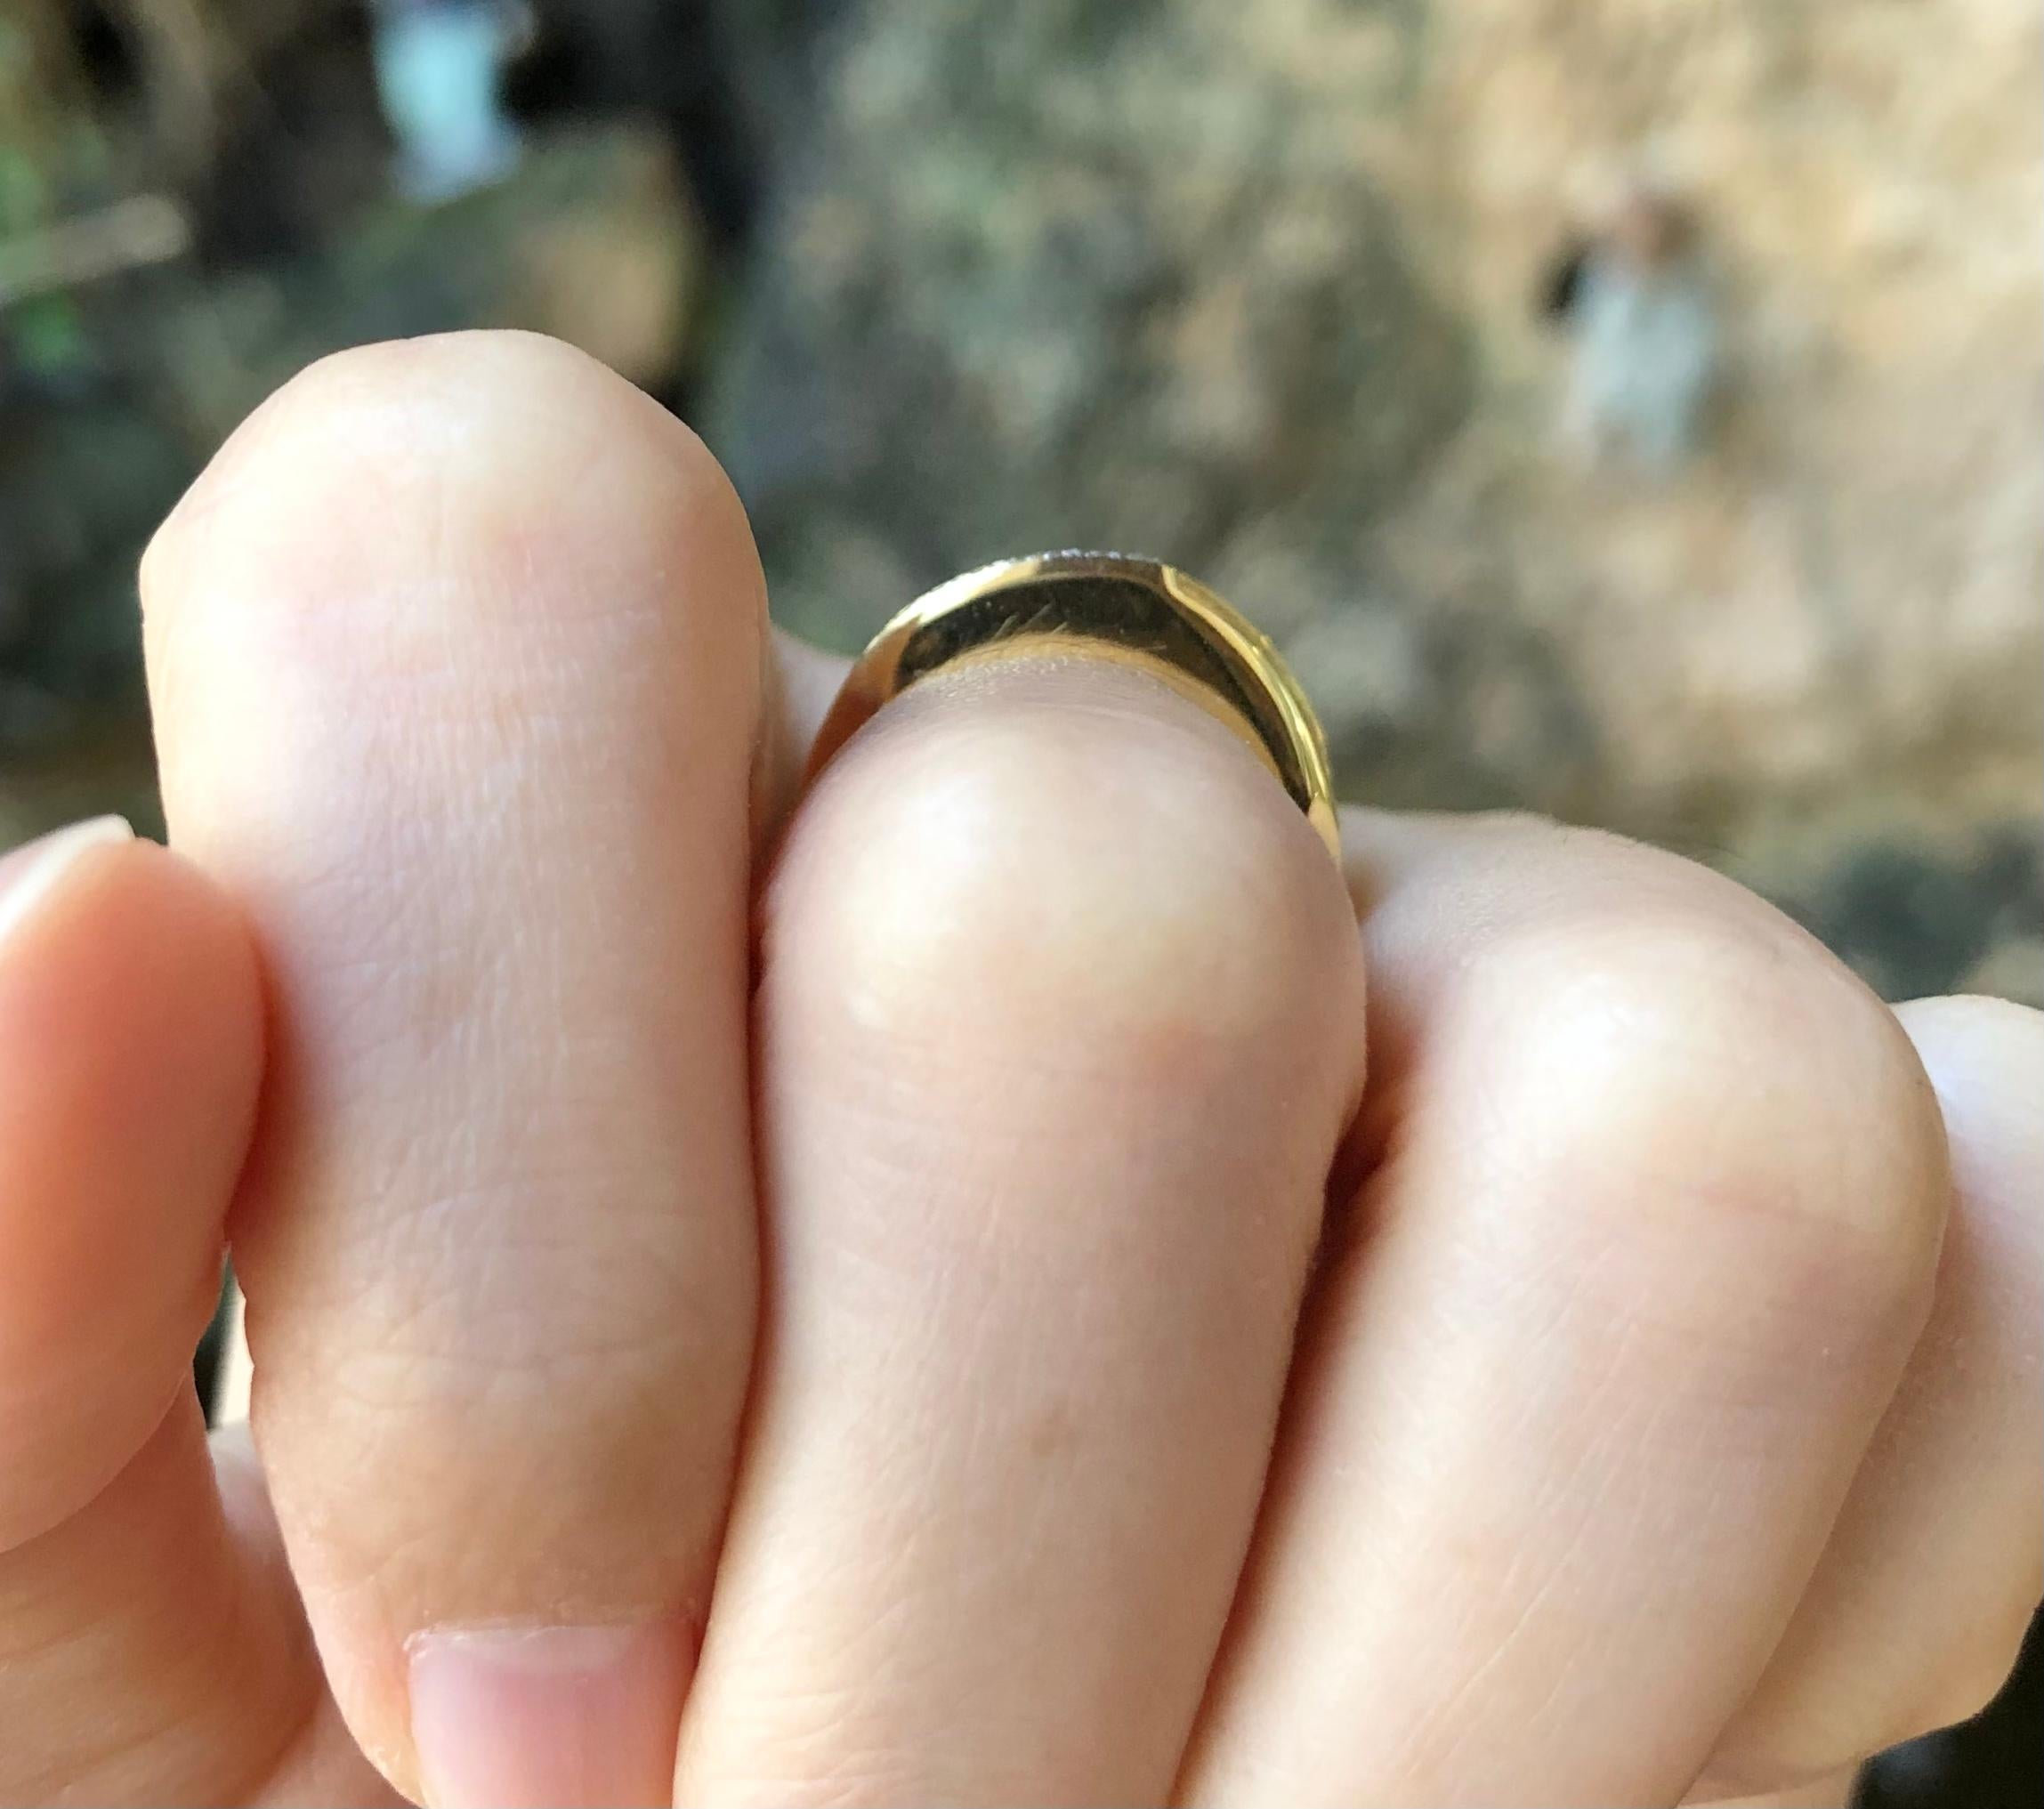 what size ring is 1.8 cm